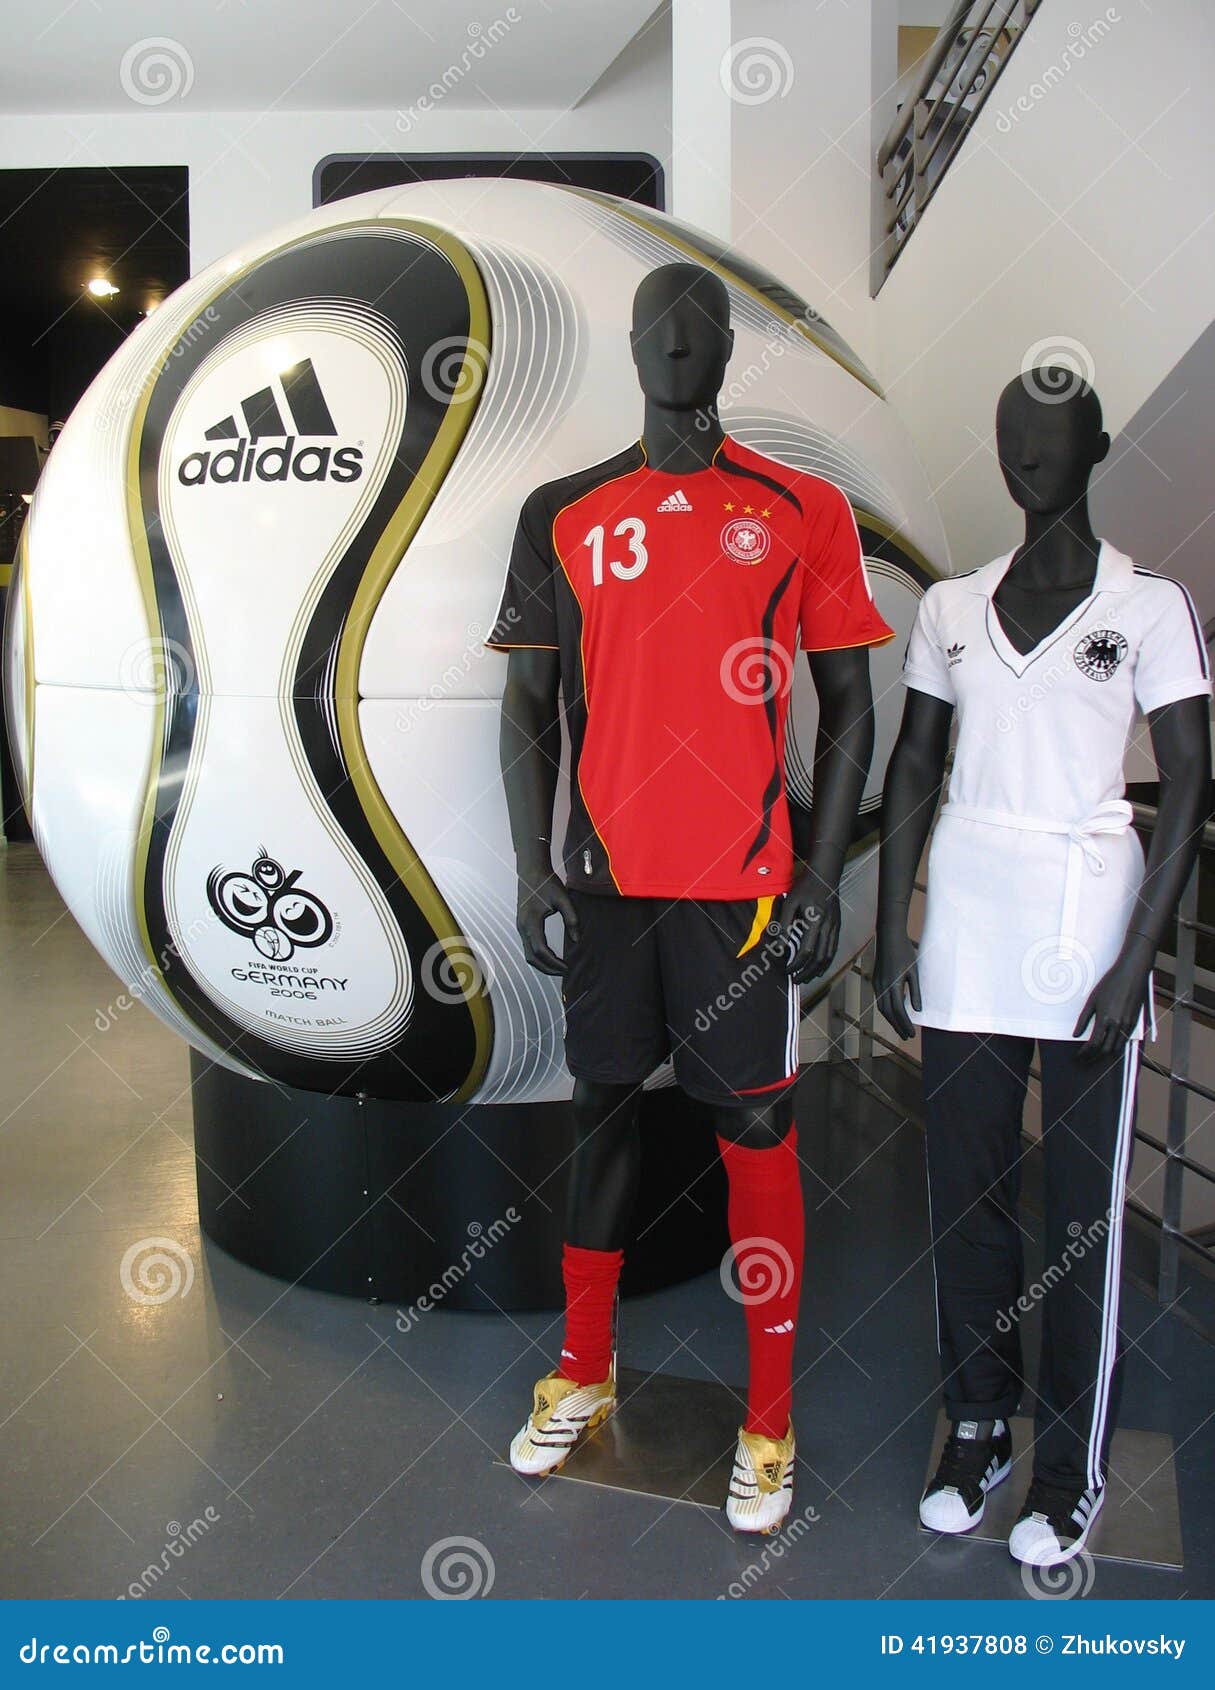 The Adidas Teamgeist Soccer Ball is the Official Match Ball of the 2006 FIFA World Cup Editorial Photo - Image of display, object: 41937808